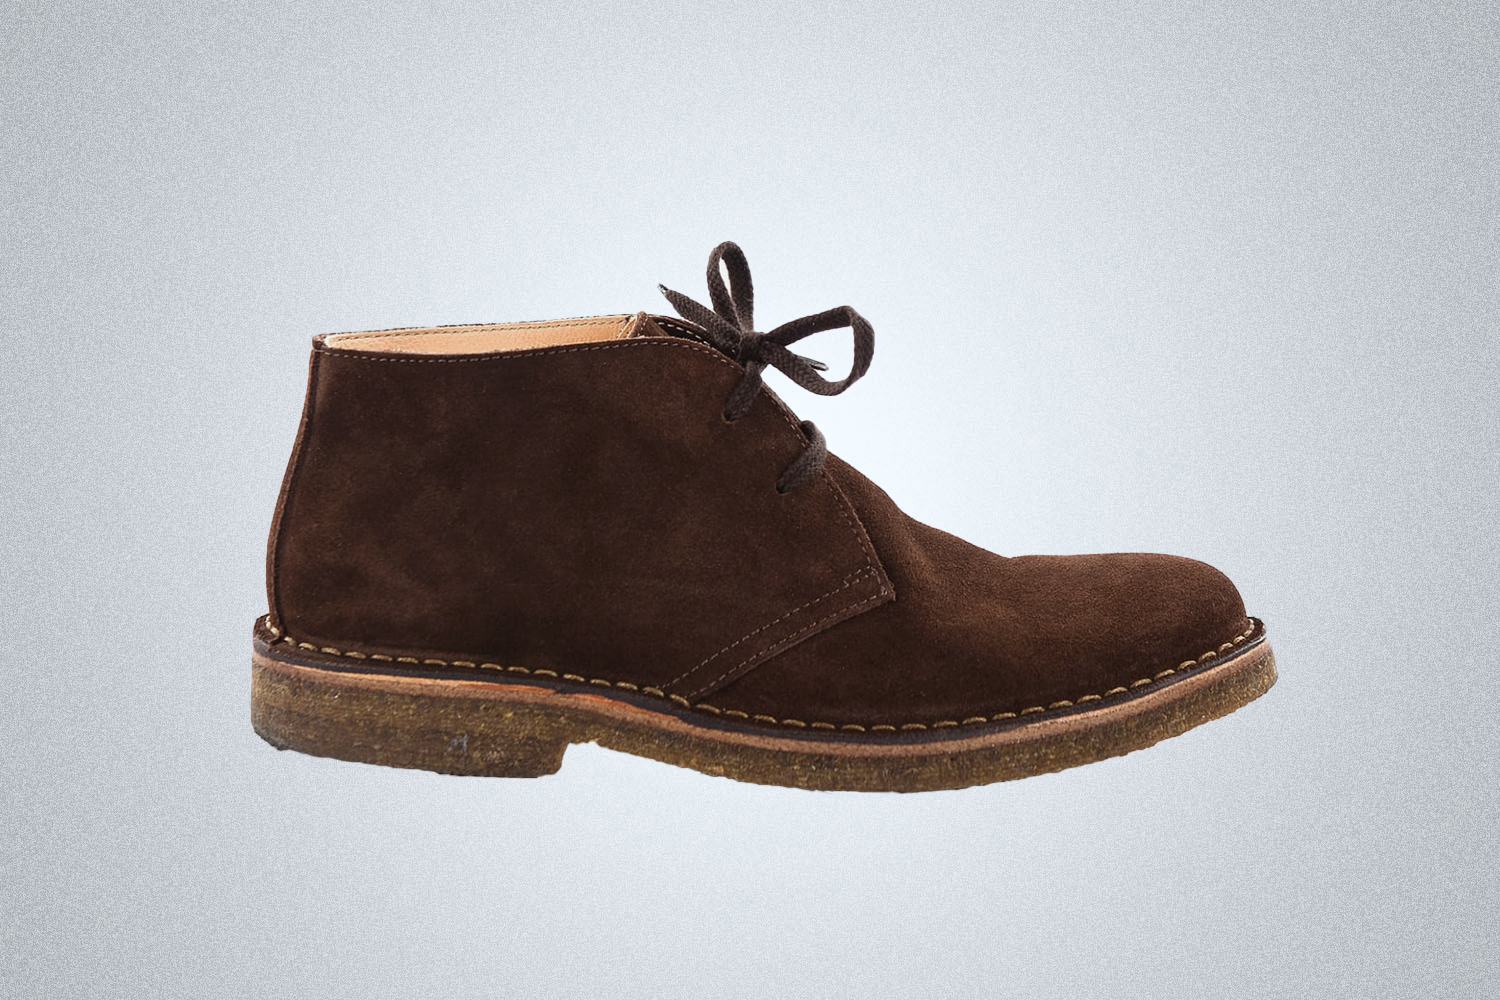 a brown leather chukka boot